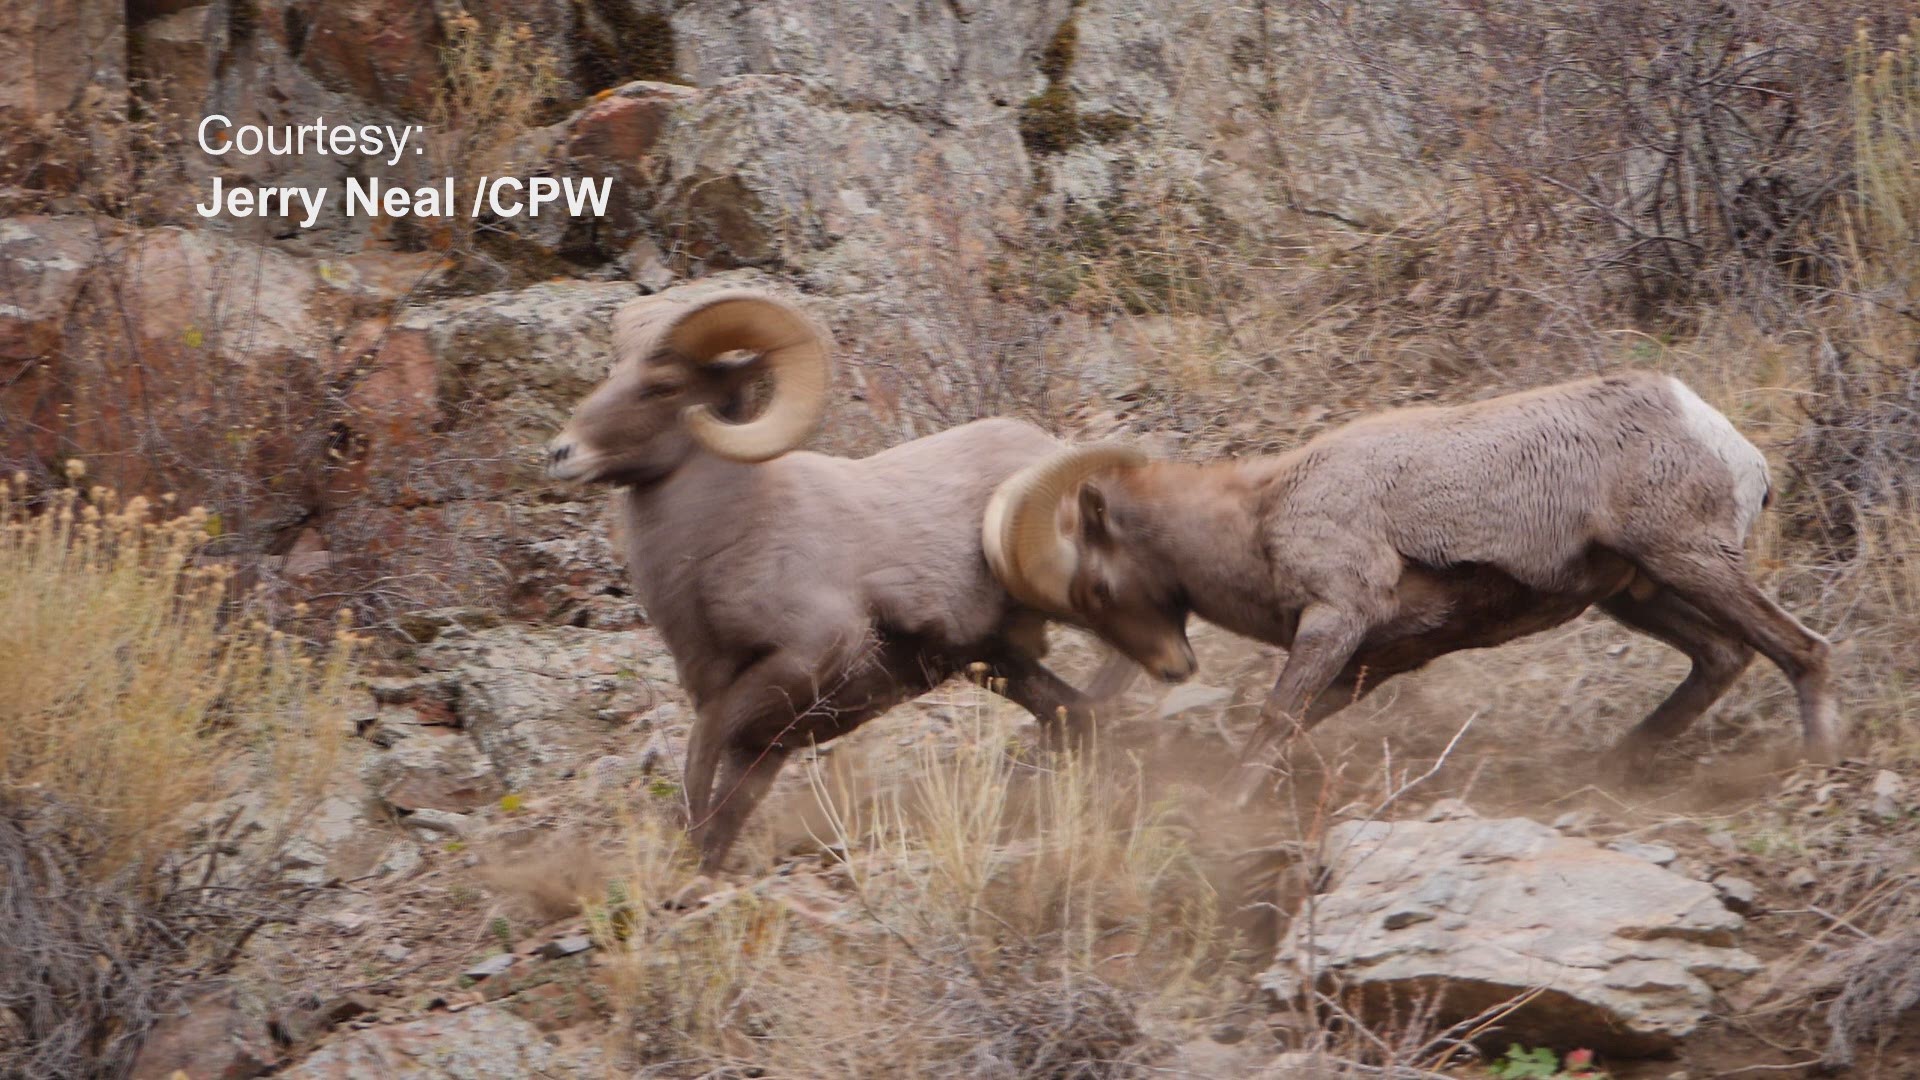 Jerry Neal with Colorado Parks and Wildlife captured this video of bighorns fighting at Waterton Canyon on Wednesday.